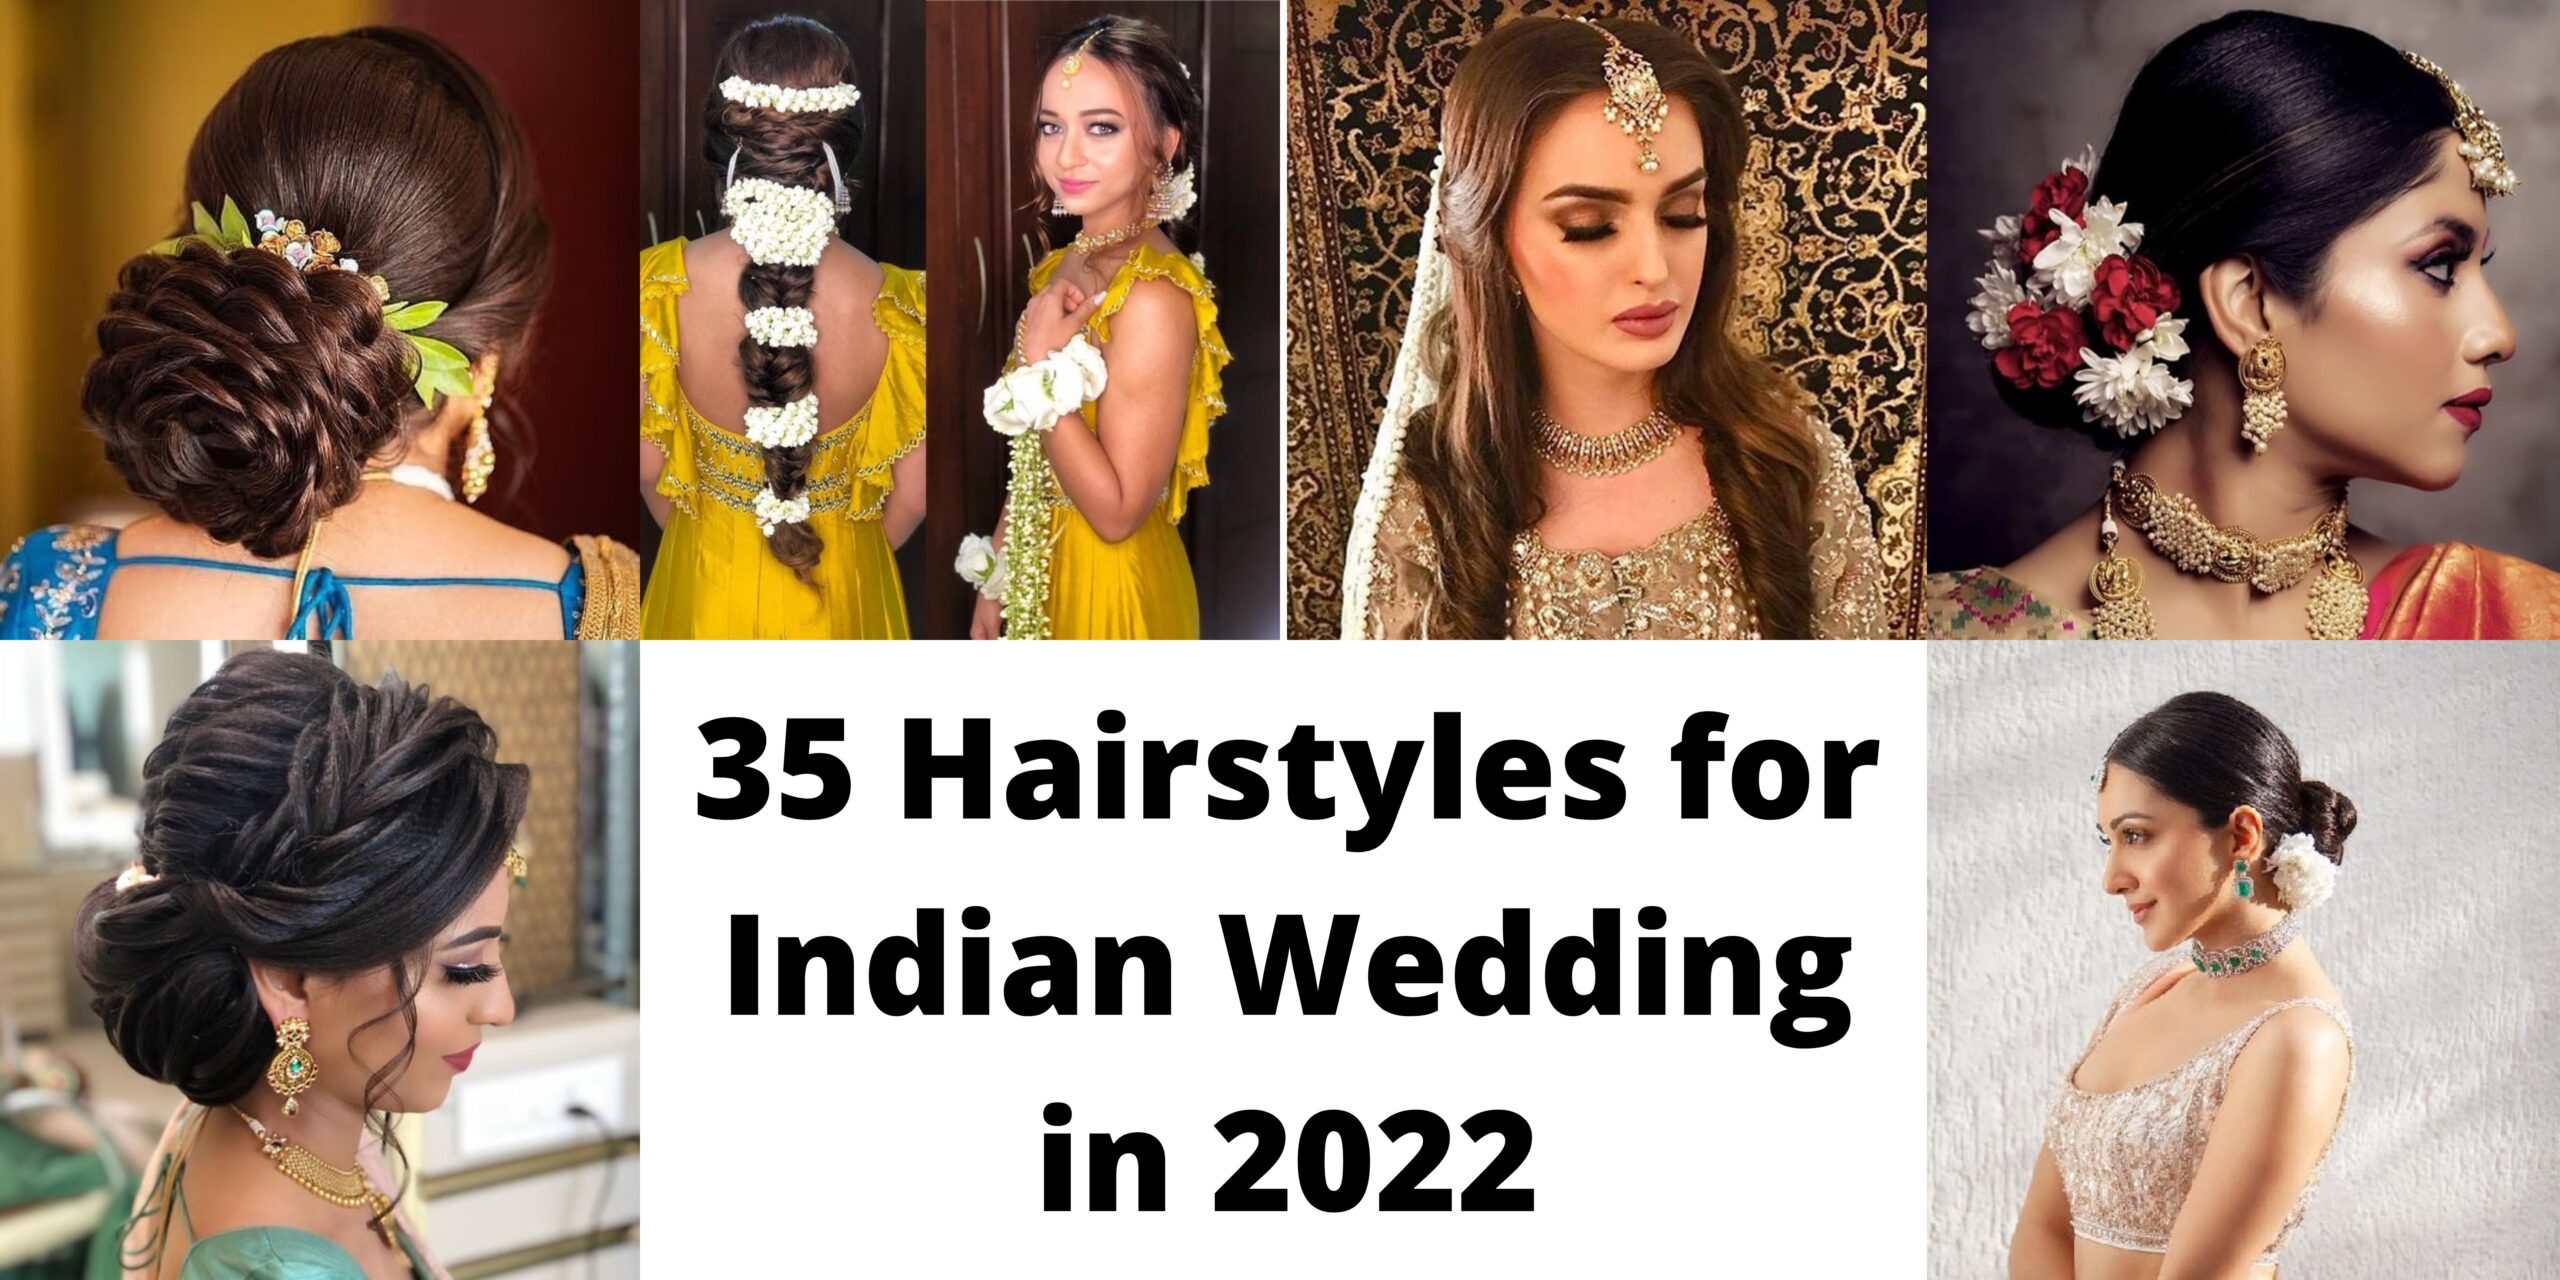 35 Hairstyles for Indian Wedding in 2022